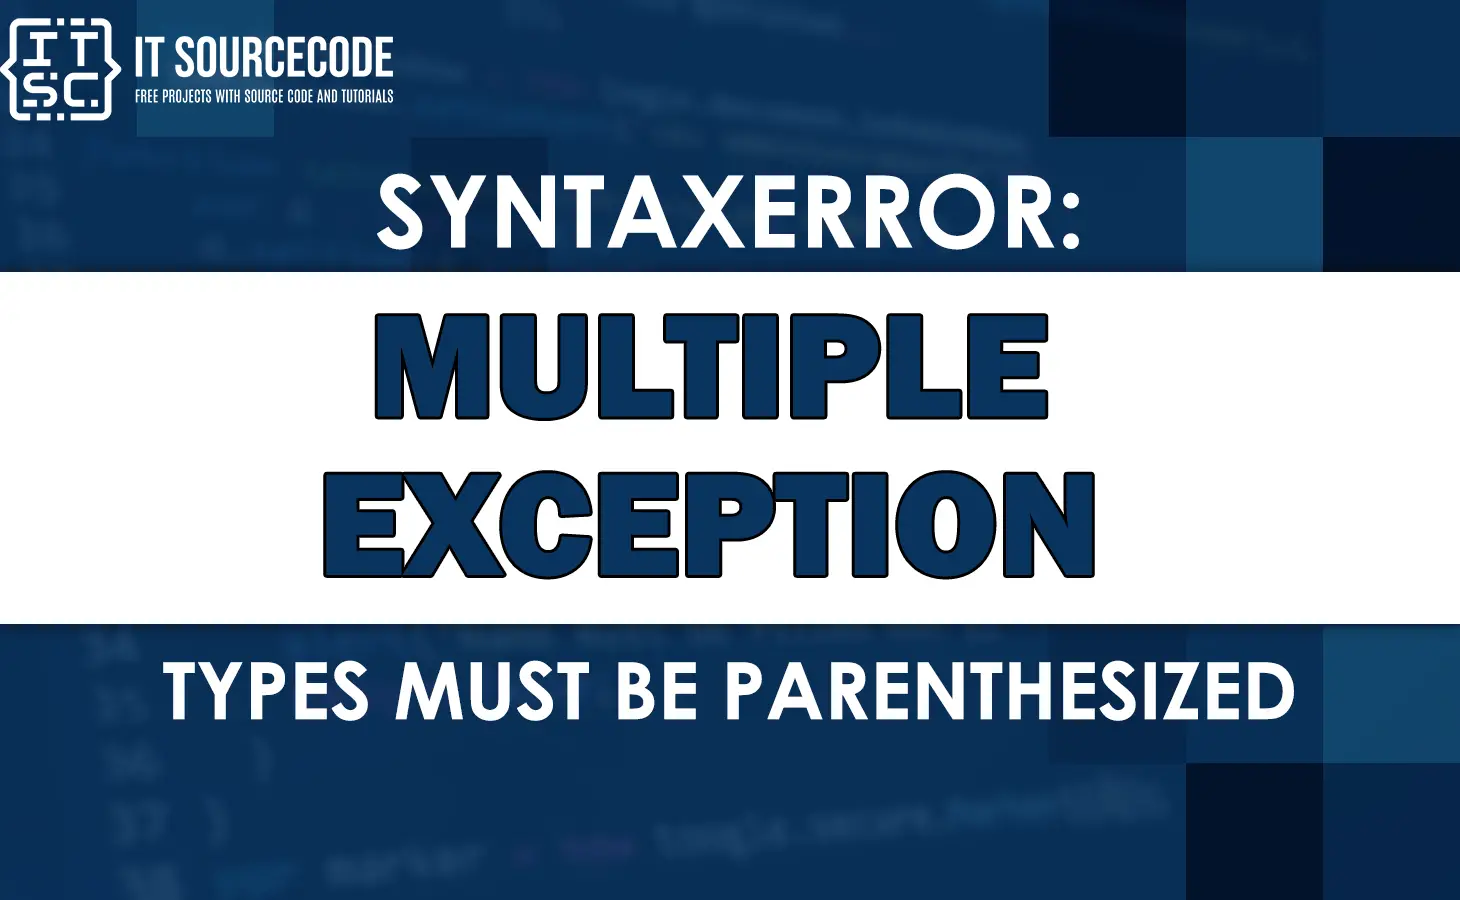 Syntaxerror: multiple exception types must be parenthesized